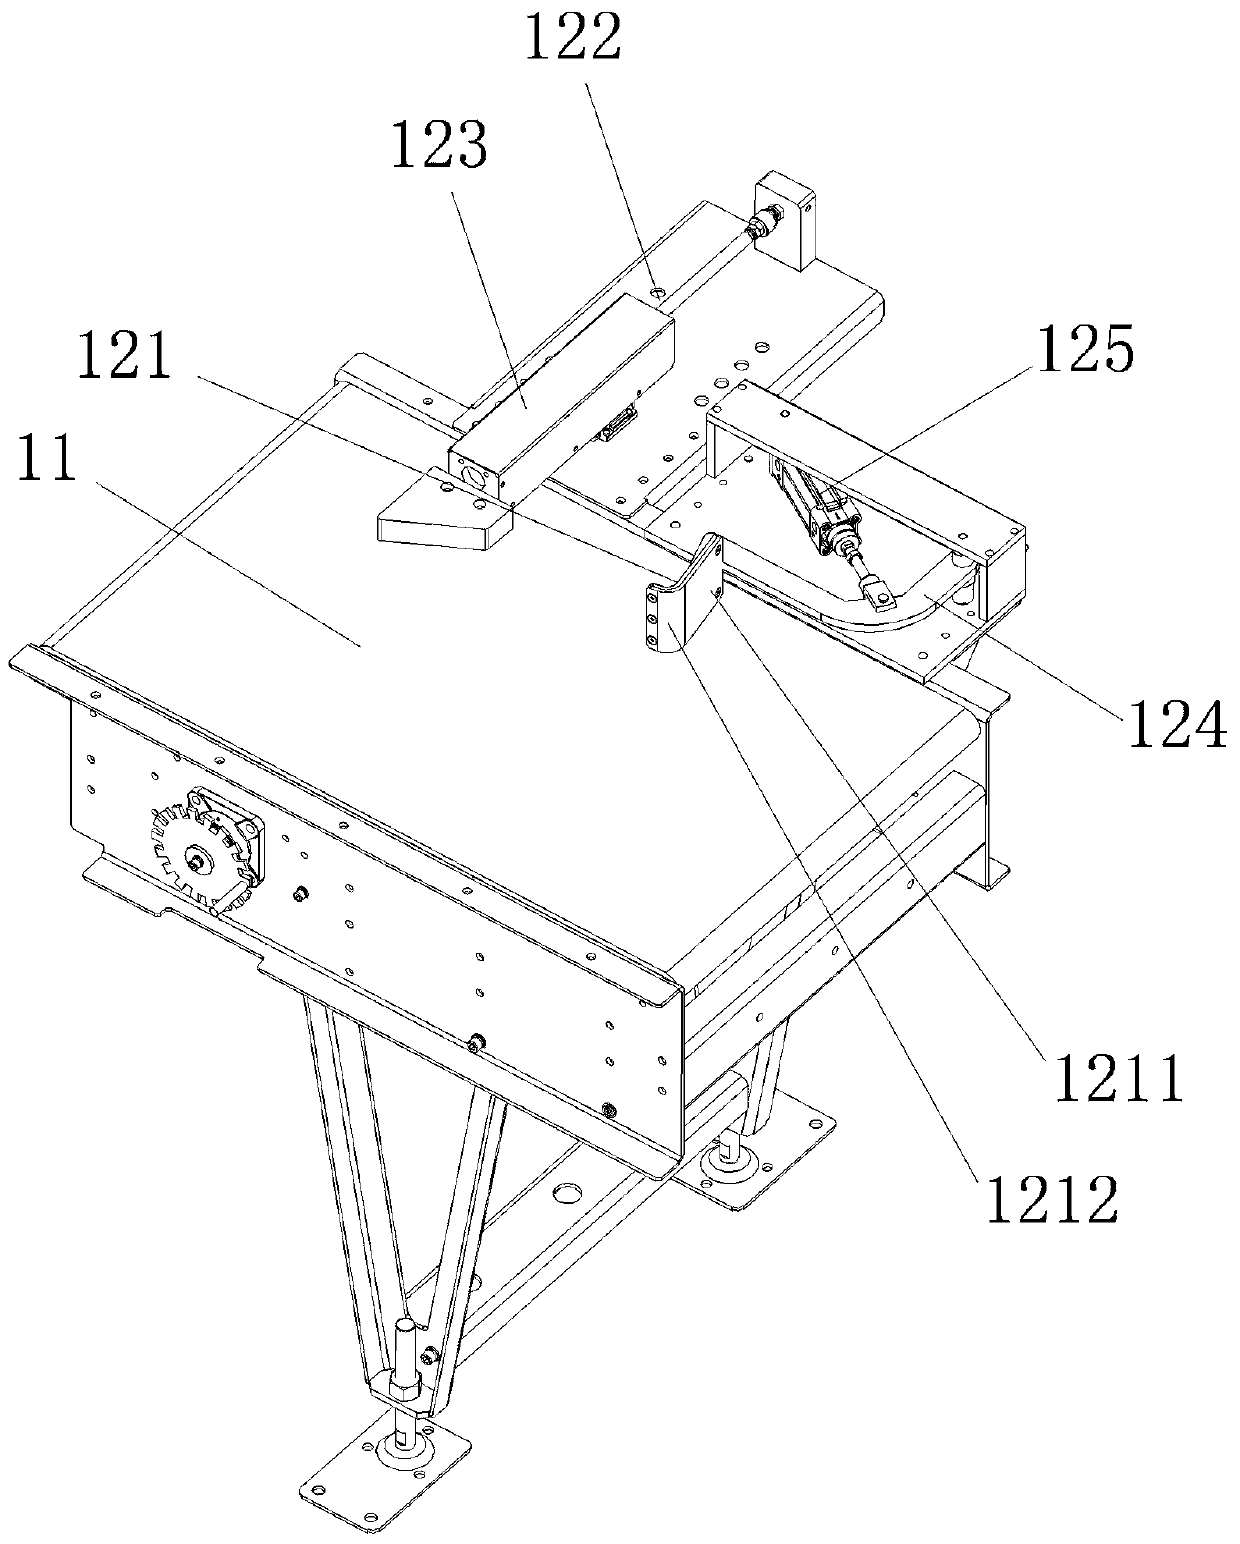 Automatic packaging box stacking machine capable of achieving selective stacking